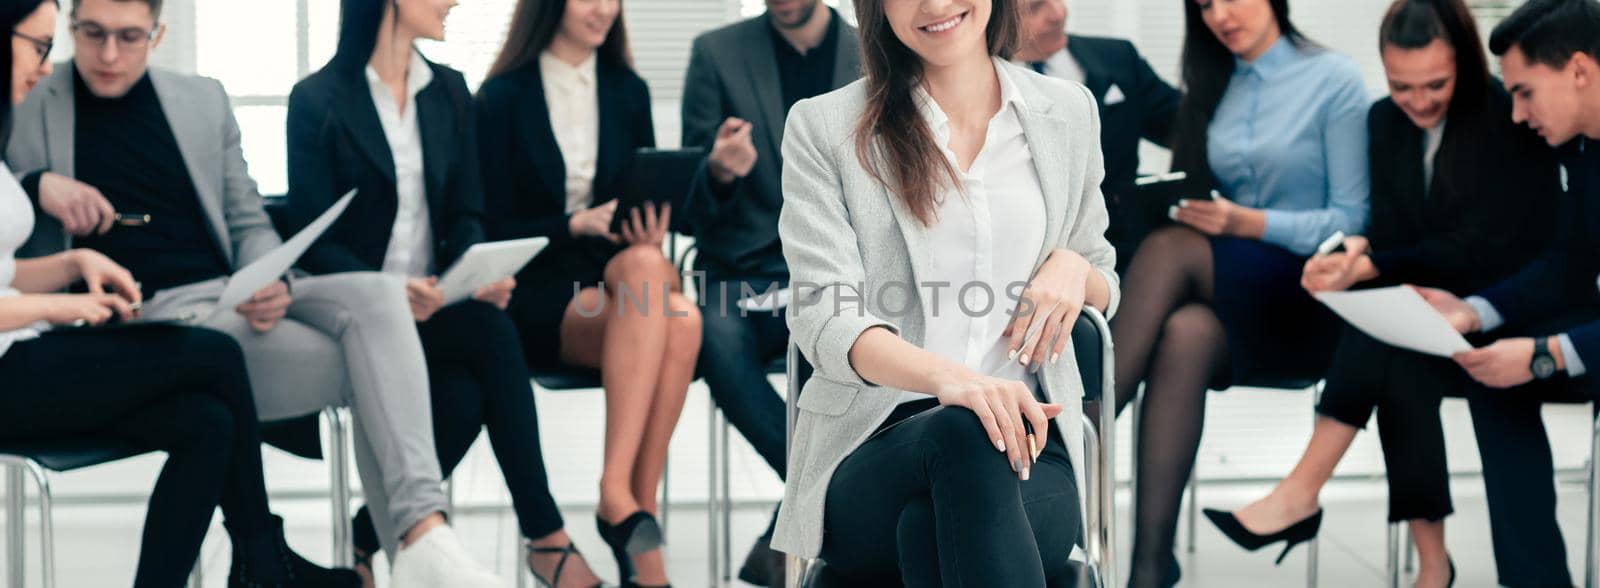 successful businesswoman and a group of leading experts in the conference room by SmartPhotoLab